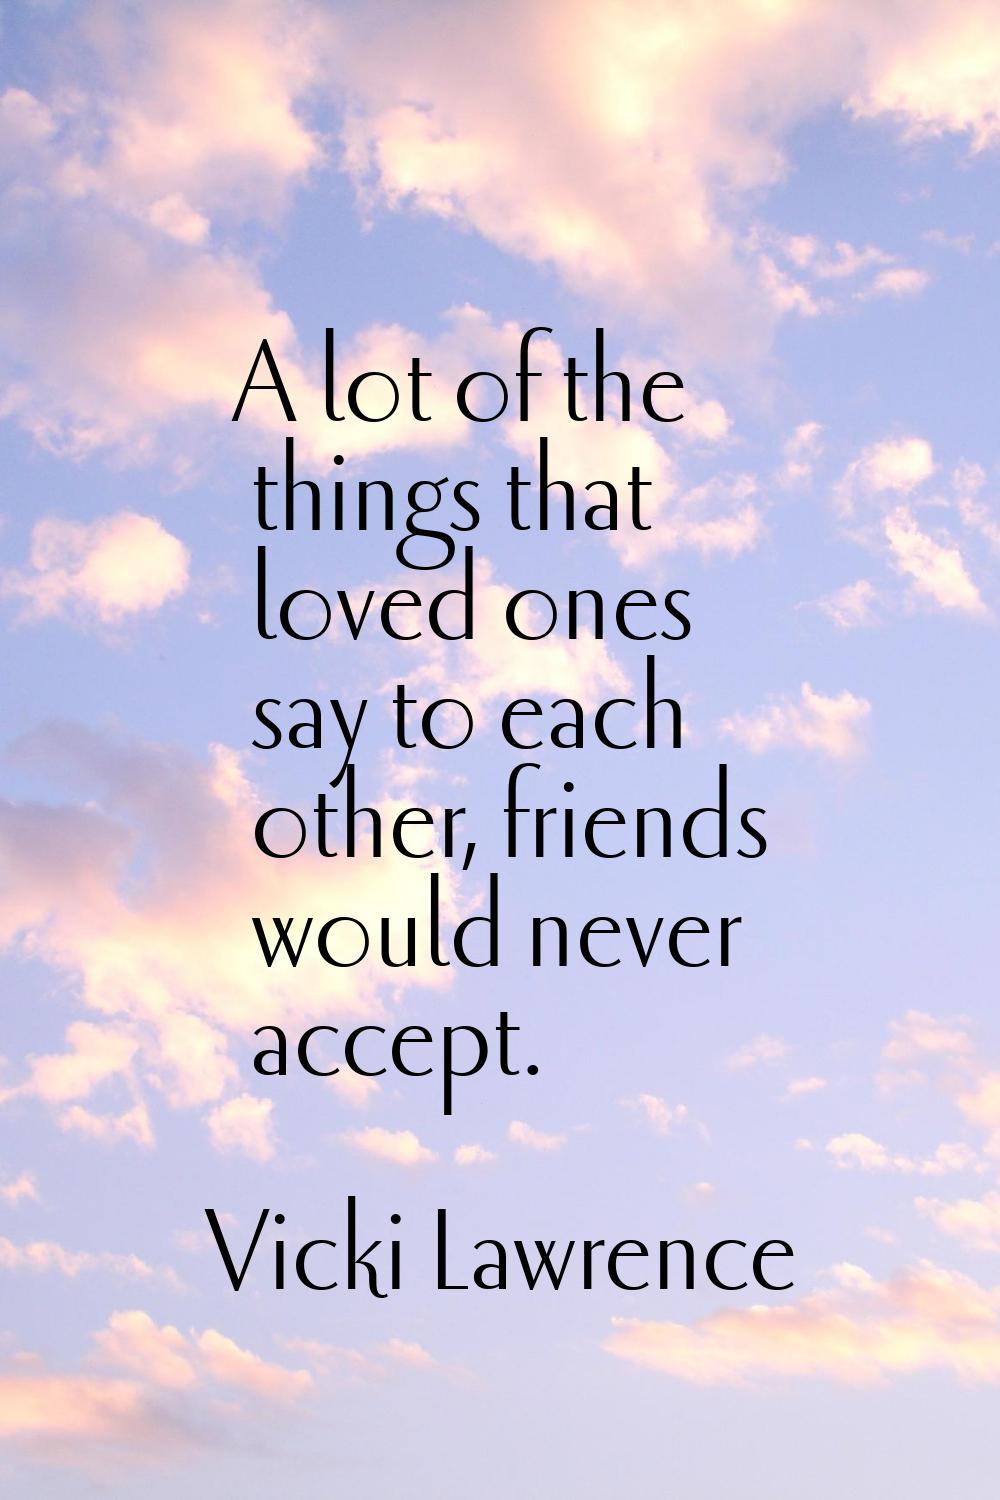 A lot of the things that loved ones say to each other, friends would never accept.